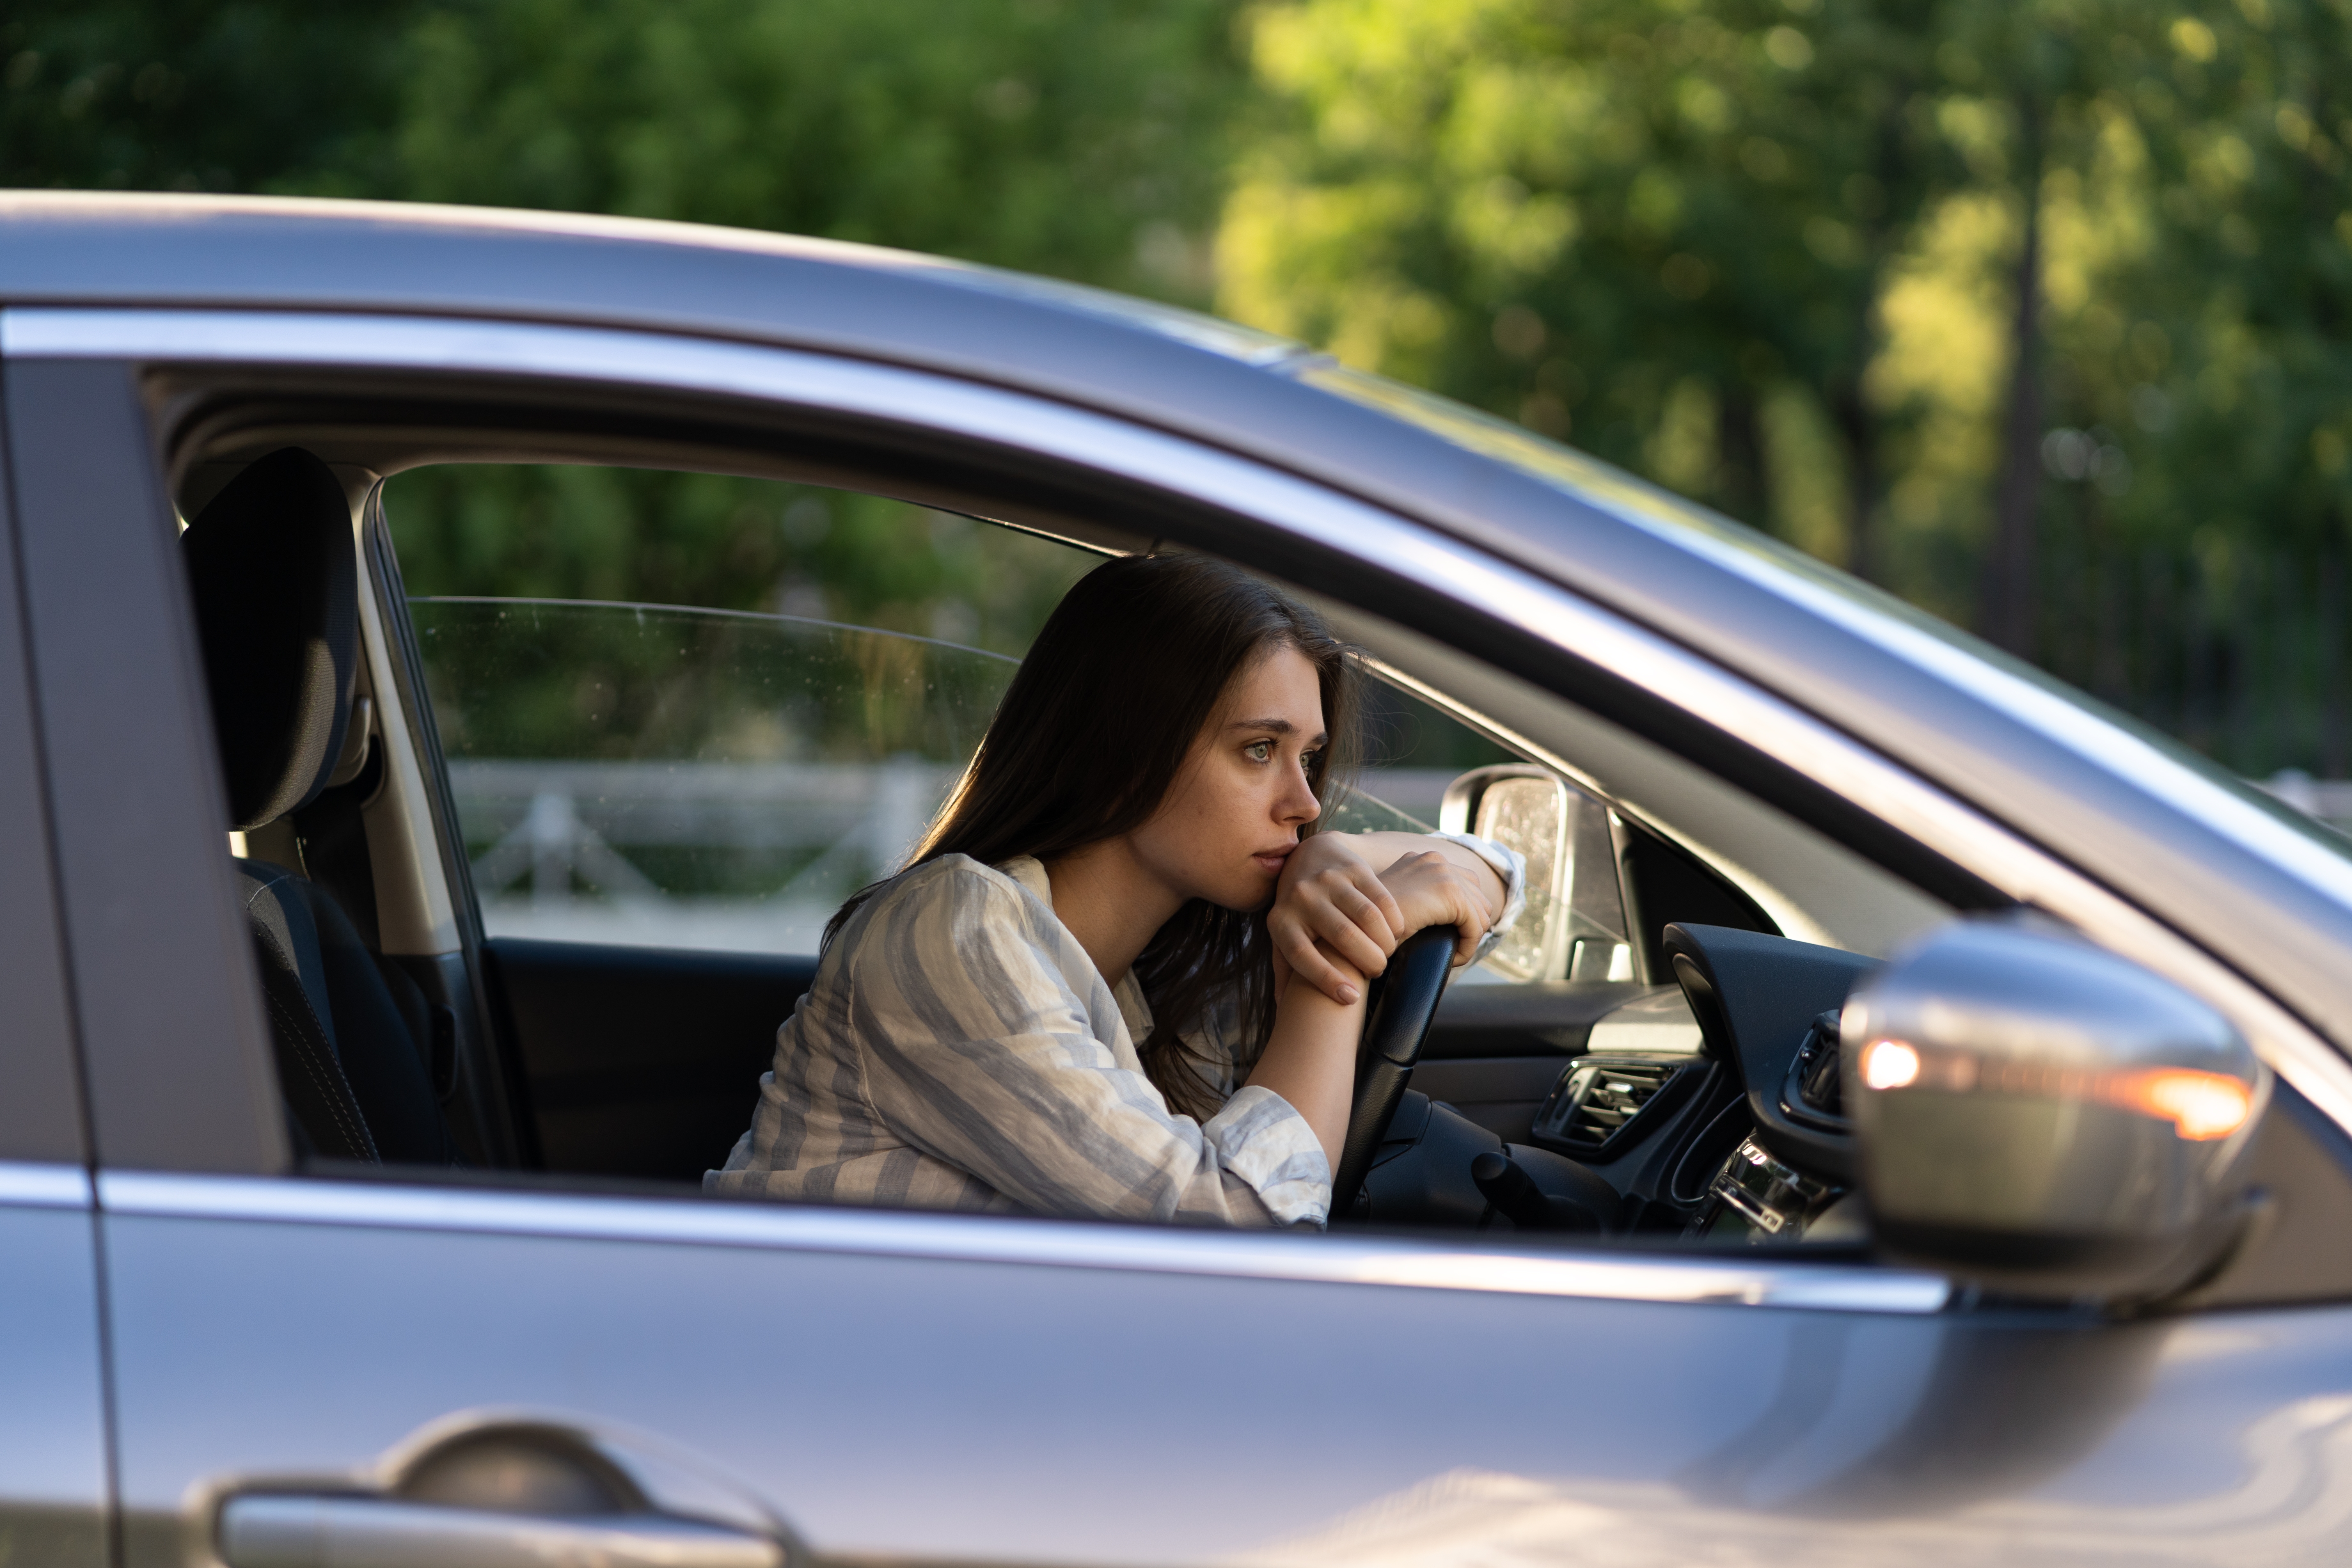 Depressed young woman driver | Source: Shutterstock